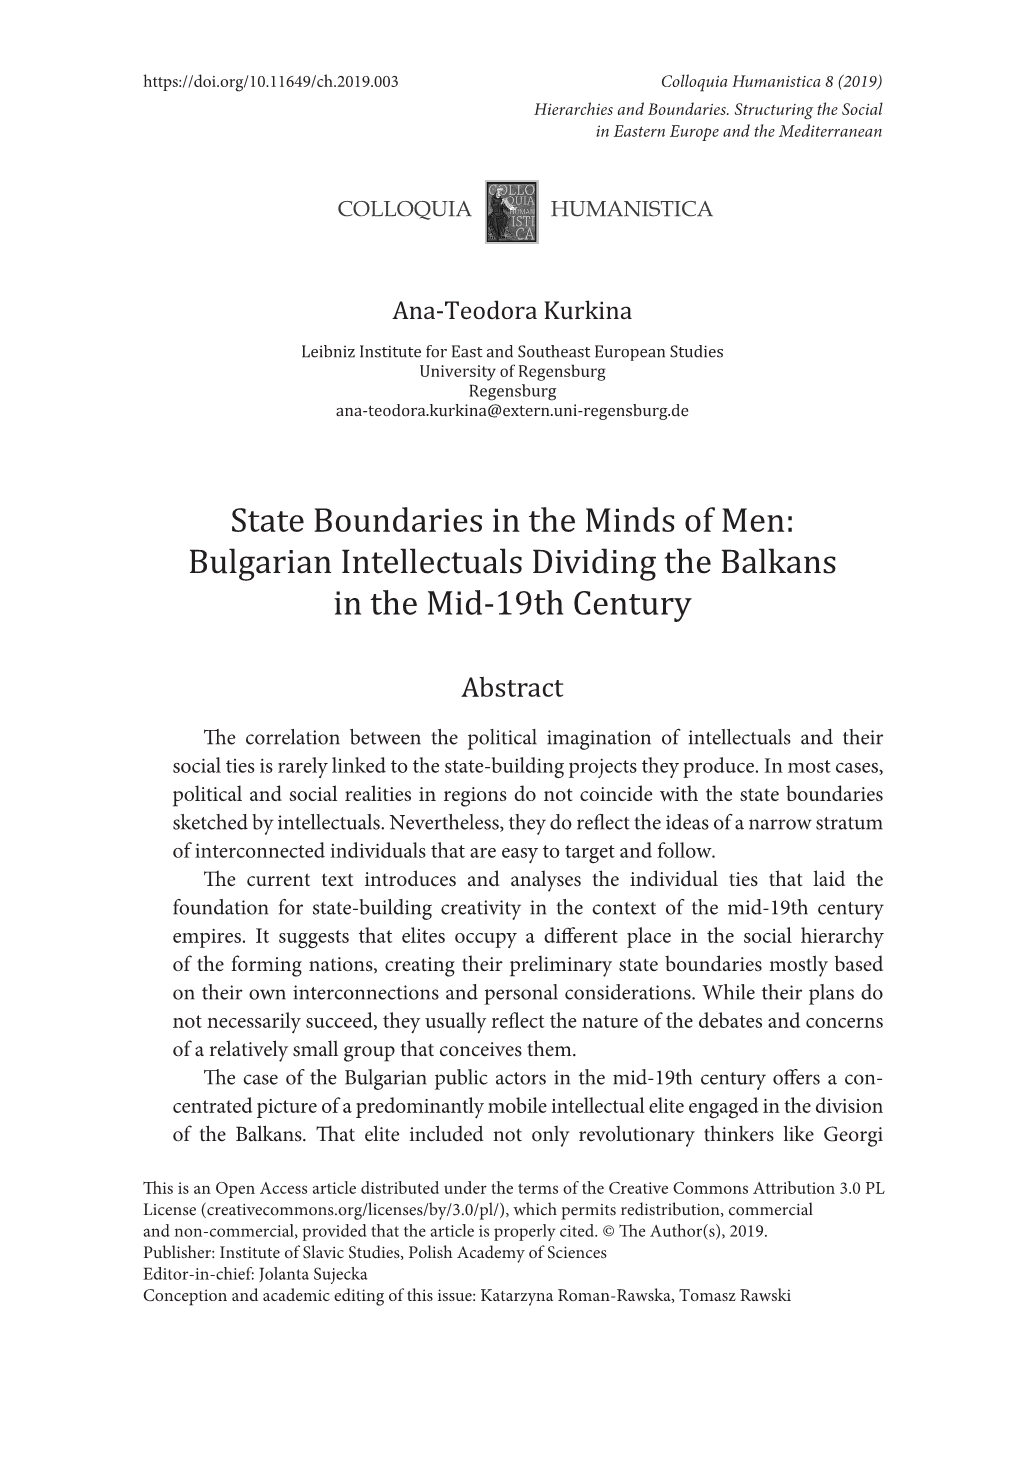 State Boundaries in the Minds of Men: Bulgarian Intellectuals Dividing the Balkans in the Mid-19Th Century